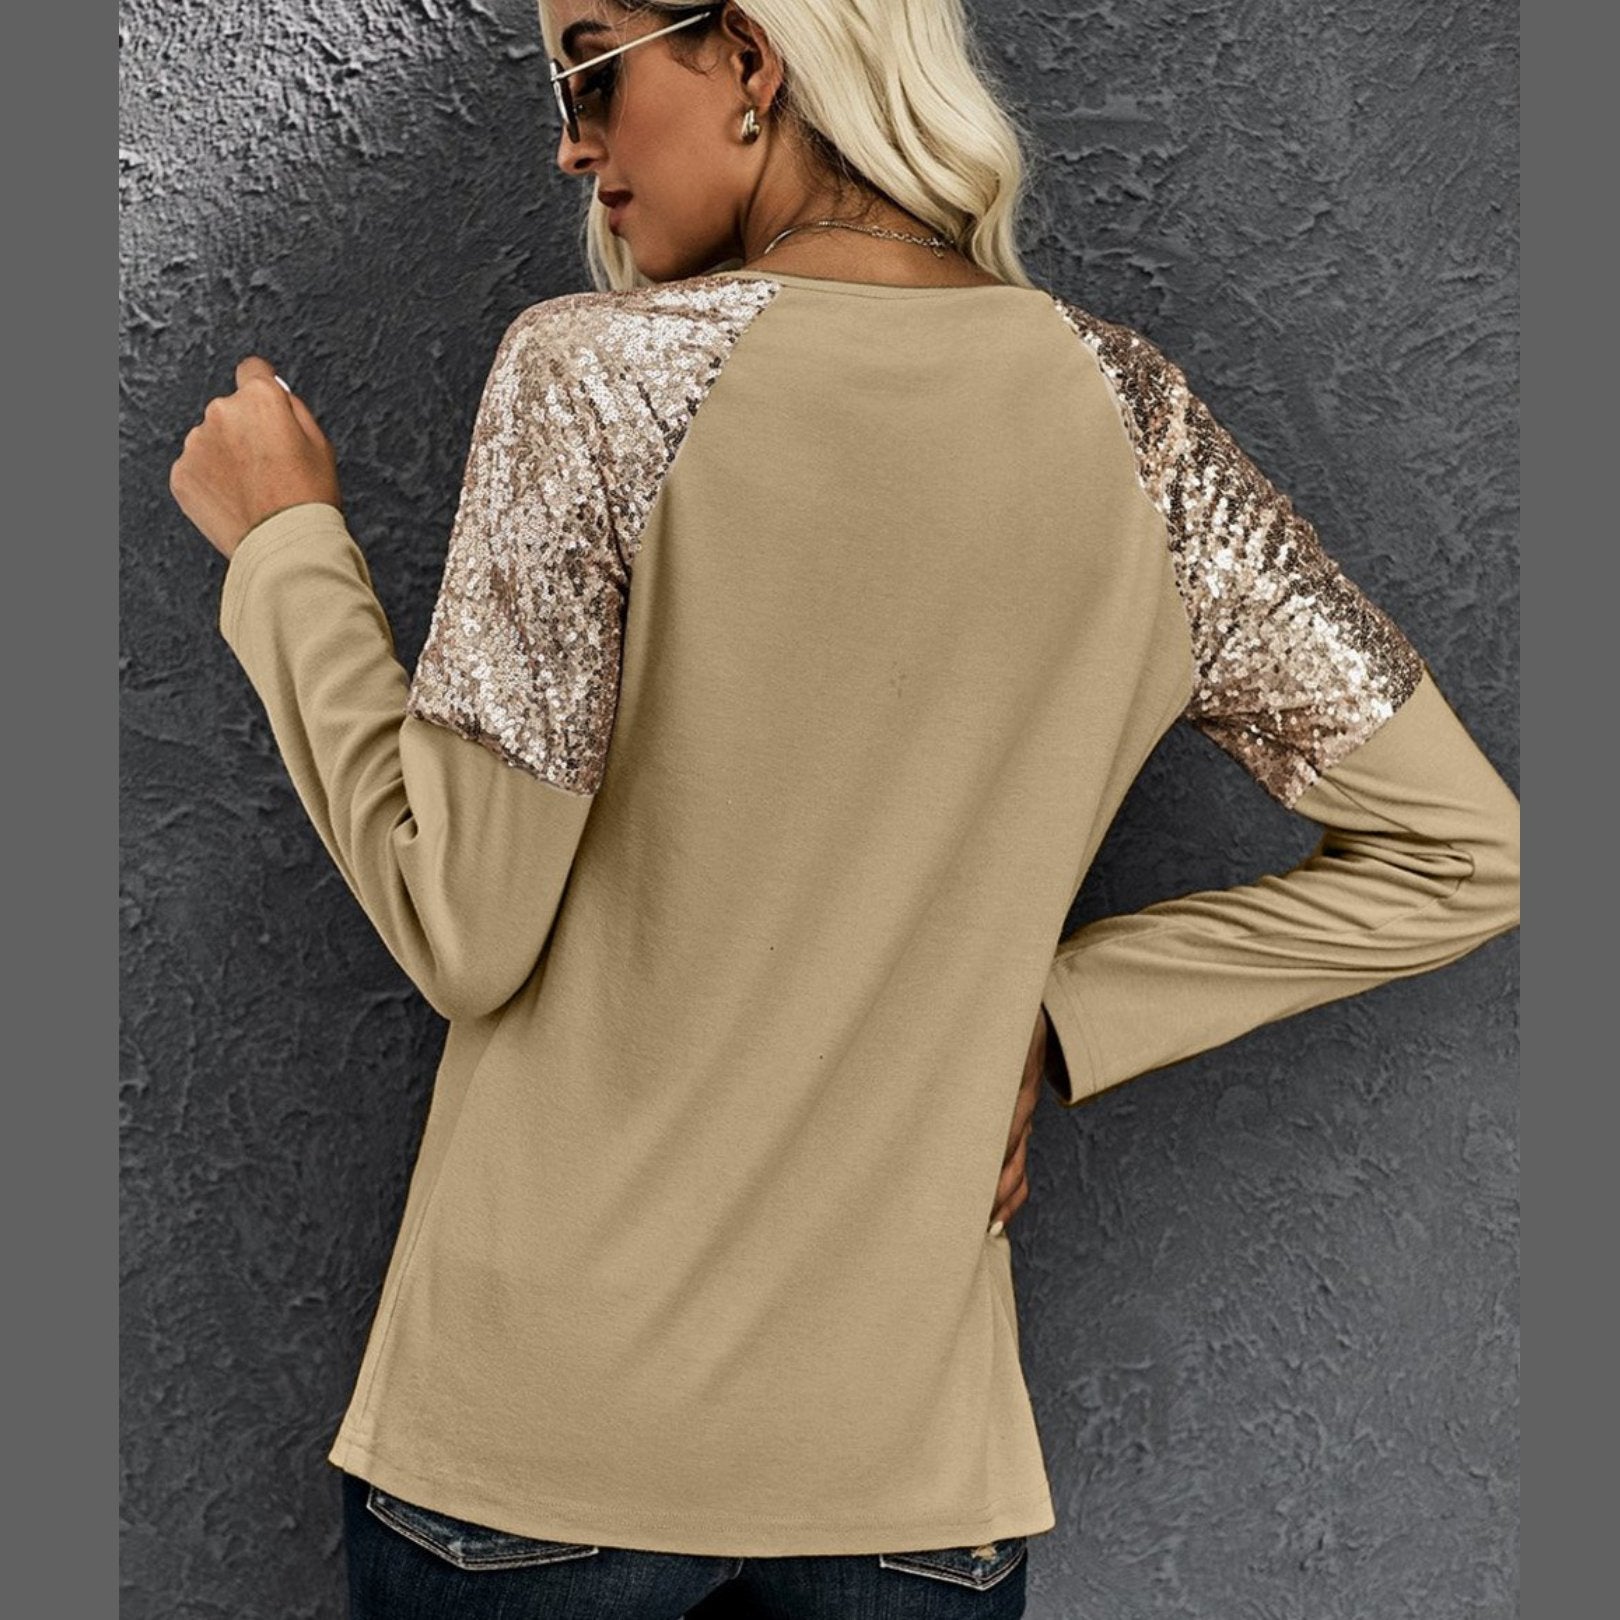 Shiny Sequin Shoulder Long Sleeve Top - BeExtra! Apparel & More